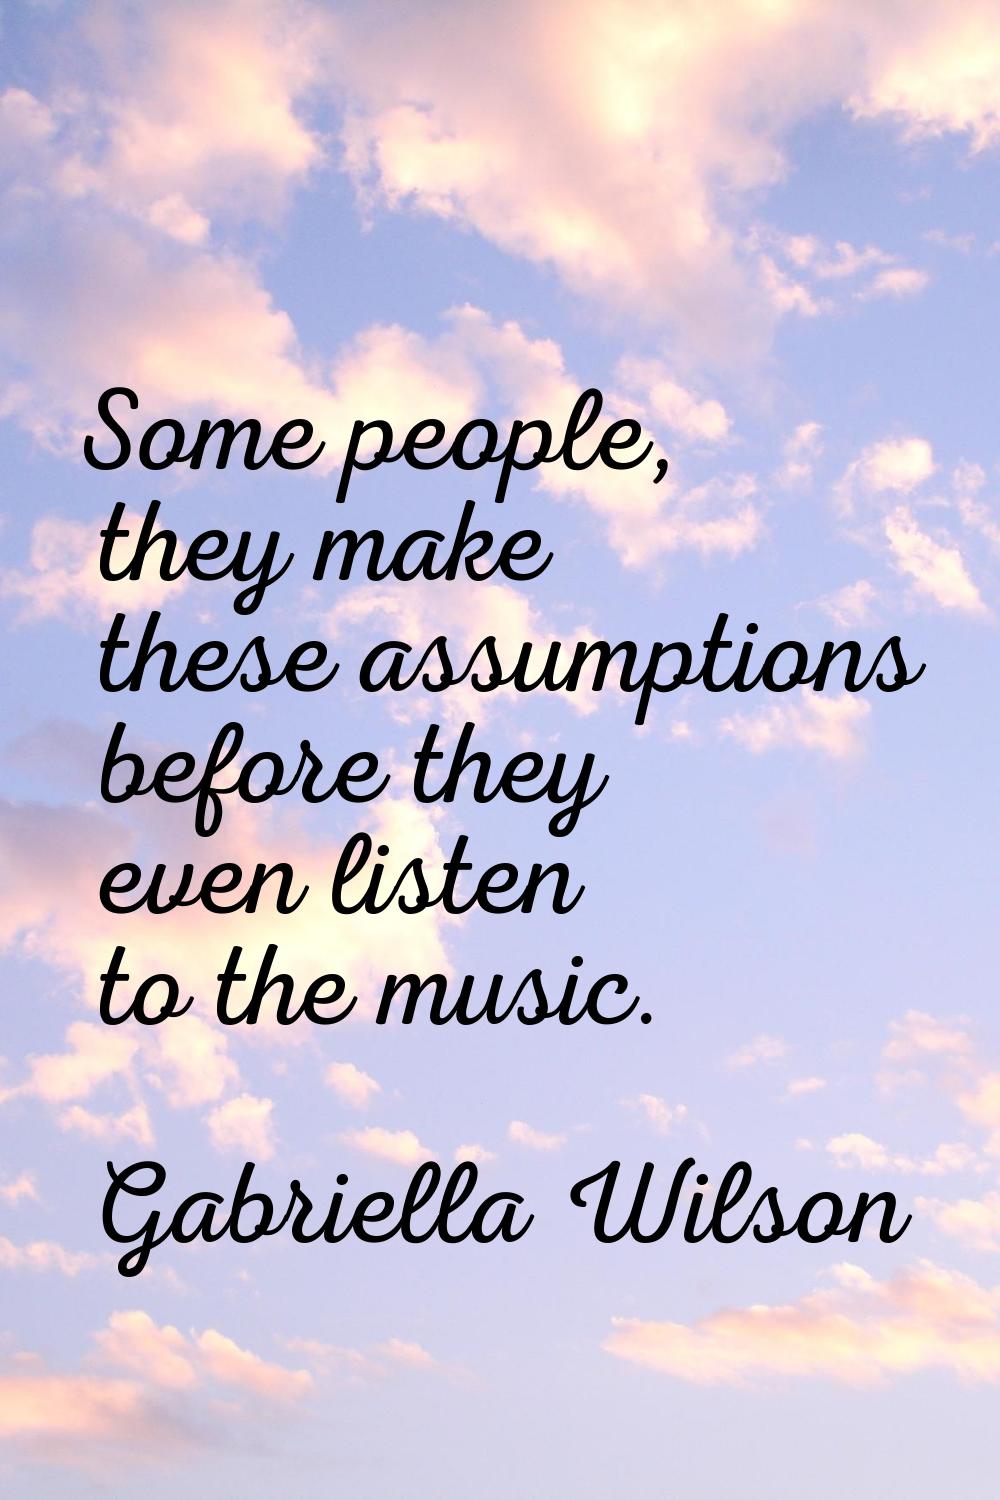 Some people, they make these assumptions before they even listen to the music.